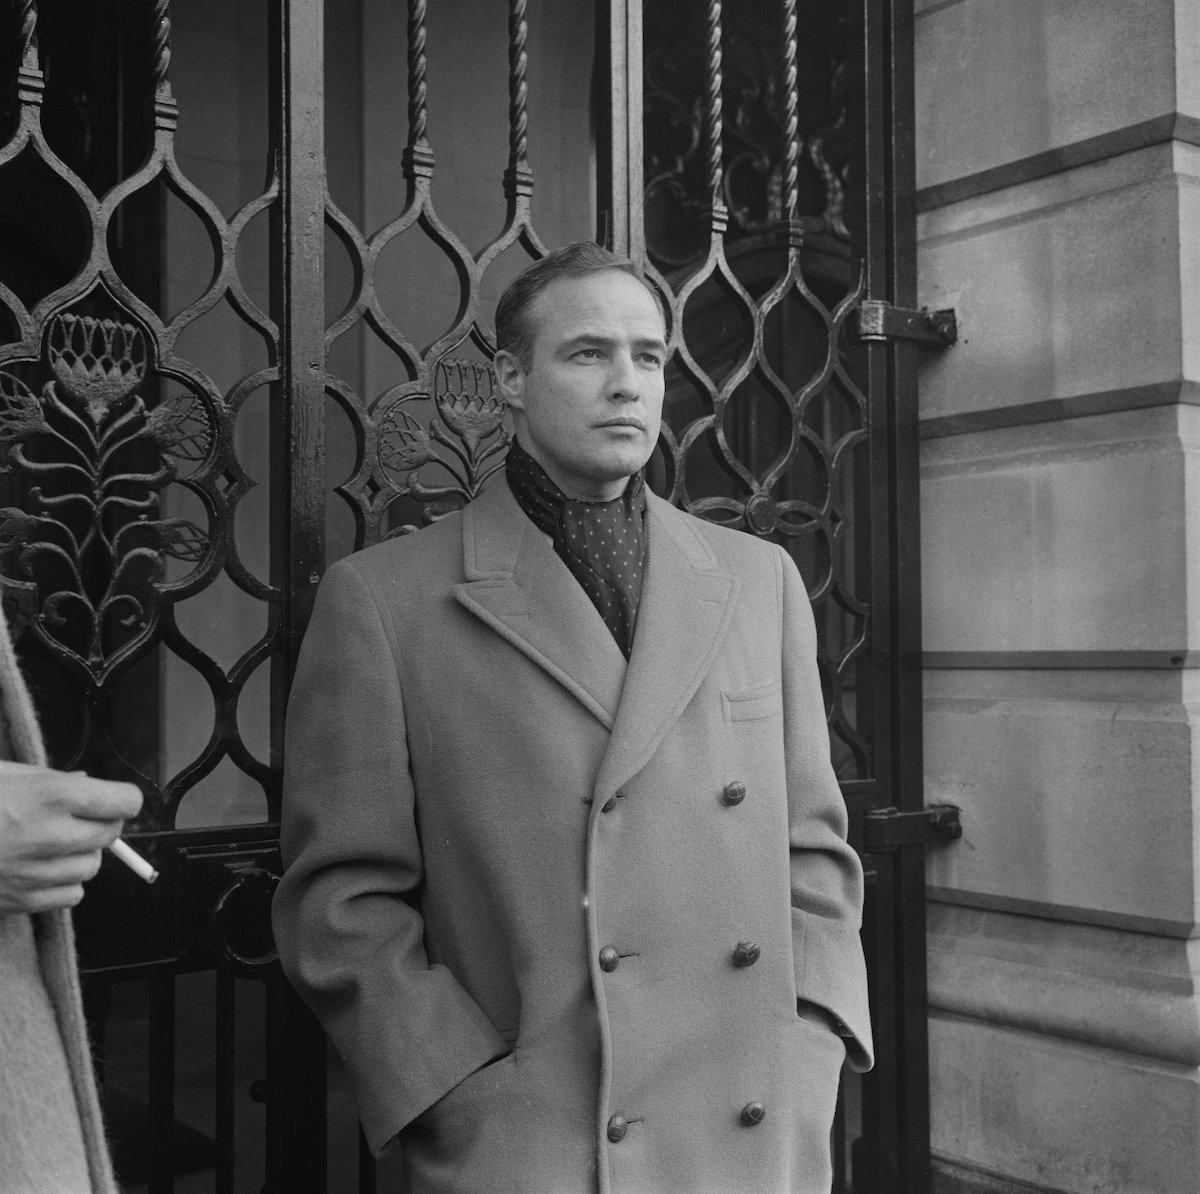 Marlon Brando appears in a long coat in a black and white photo